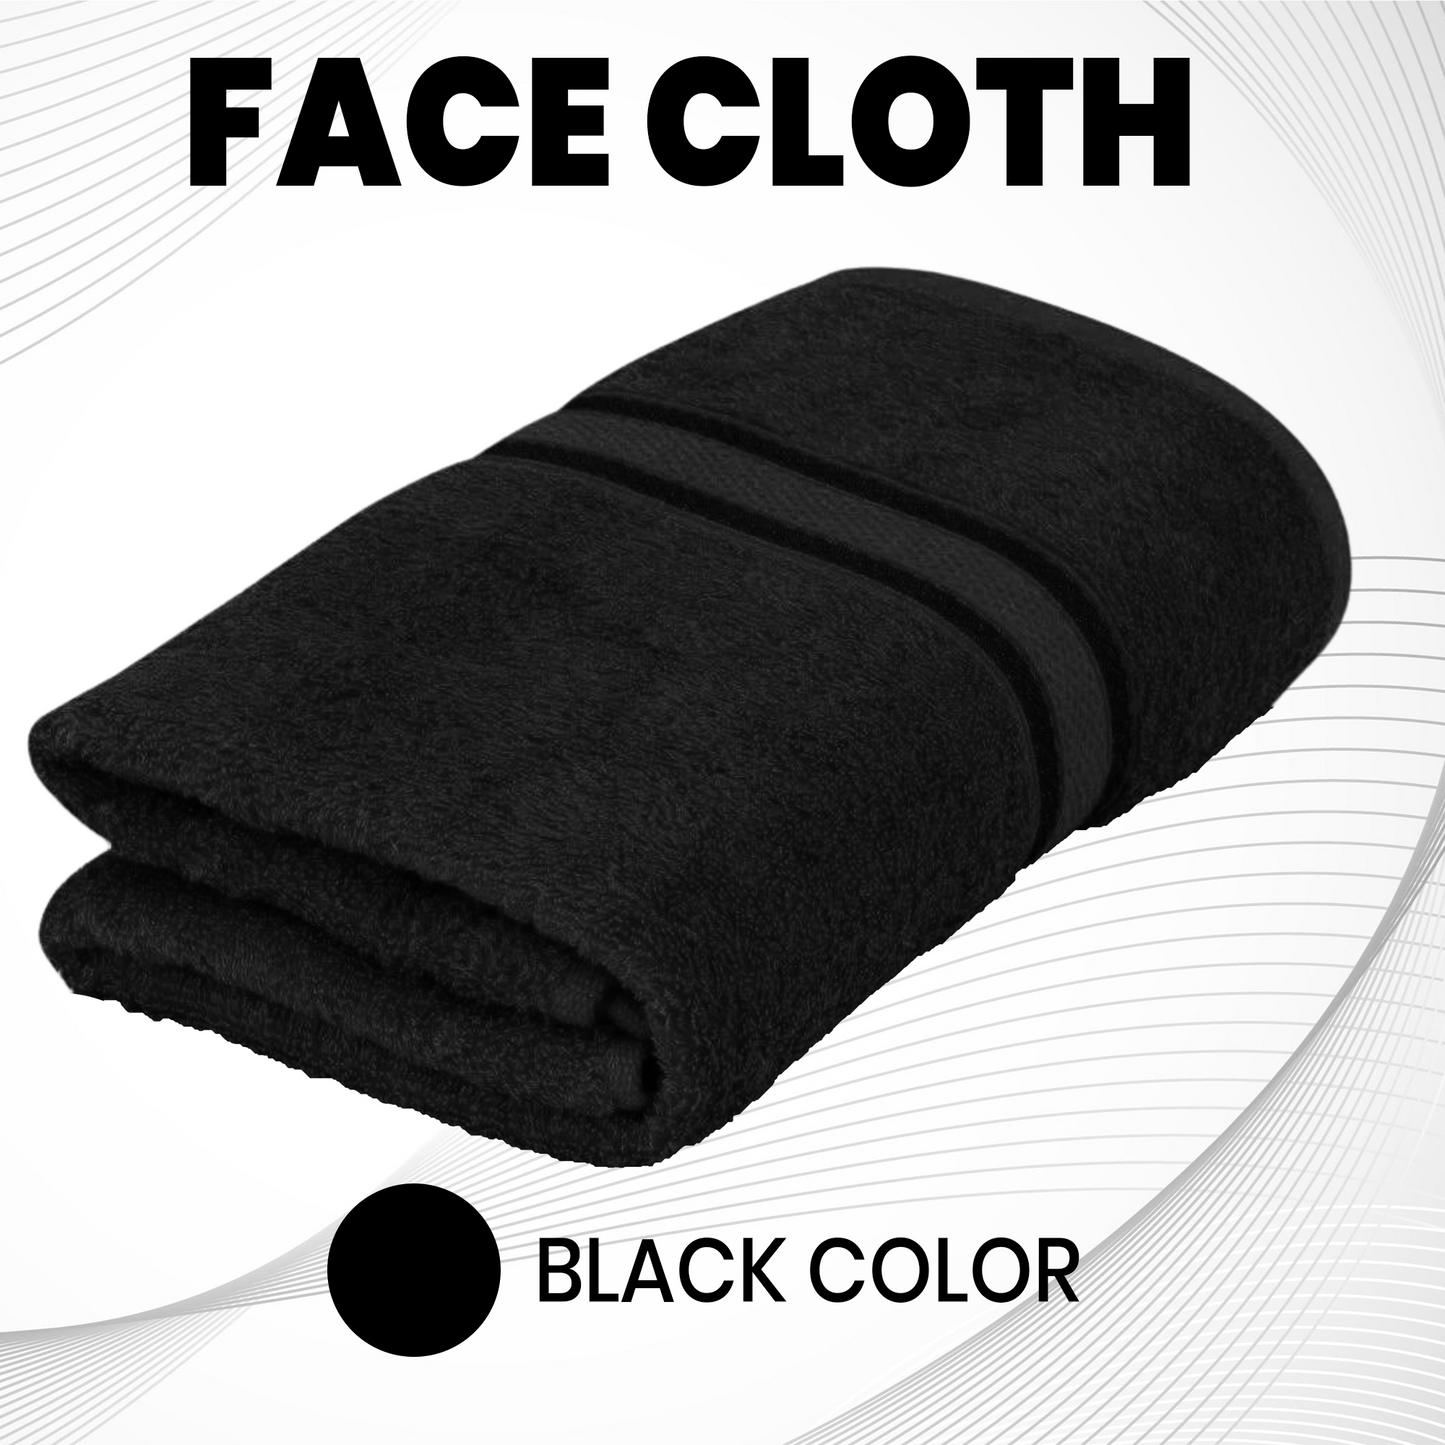 Flannel Face Towels pack Luxury Flannels 100% Royal Egyptian Cotton Face Cloths UK ⭐⭐⭐⭐⭐